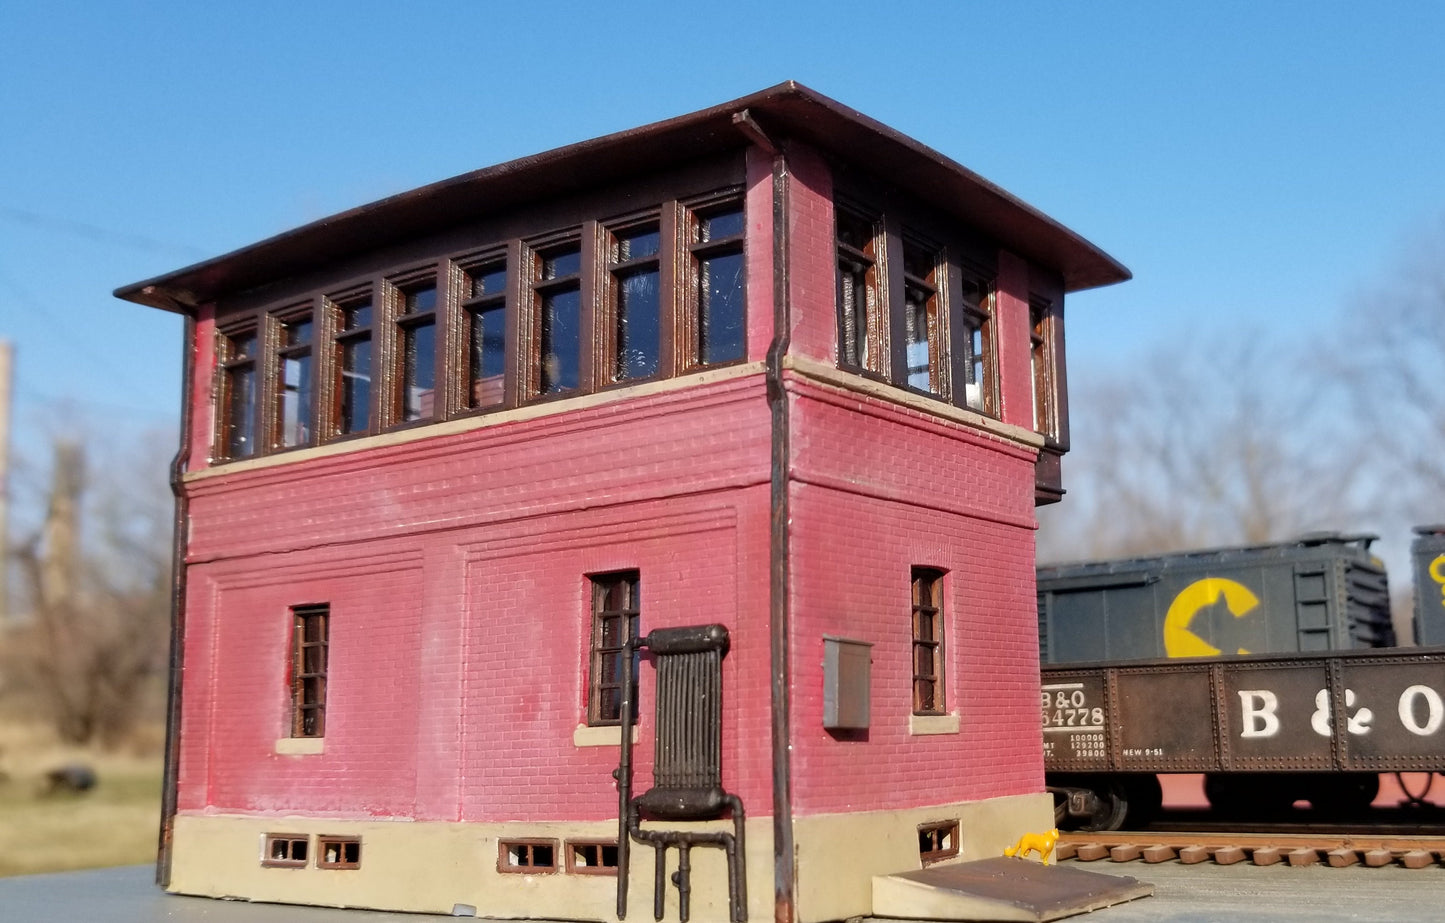 Tower D  Grafton, WV - HO scale